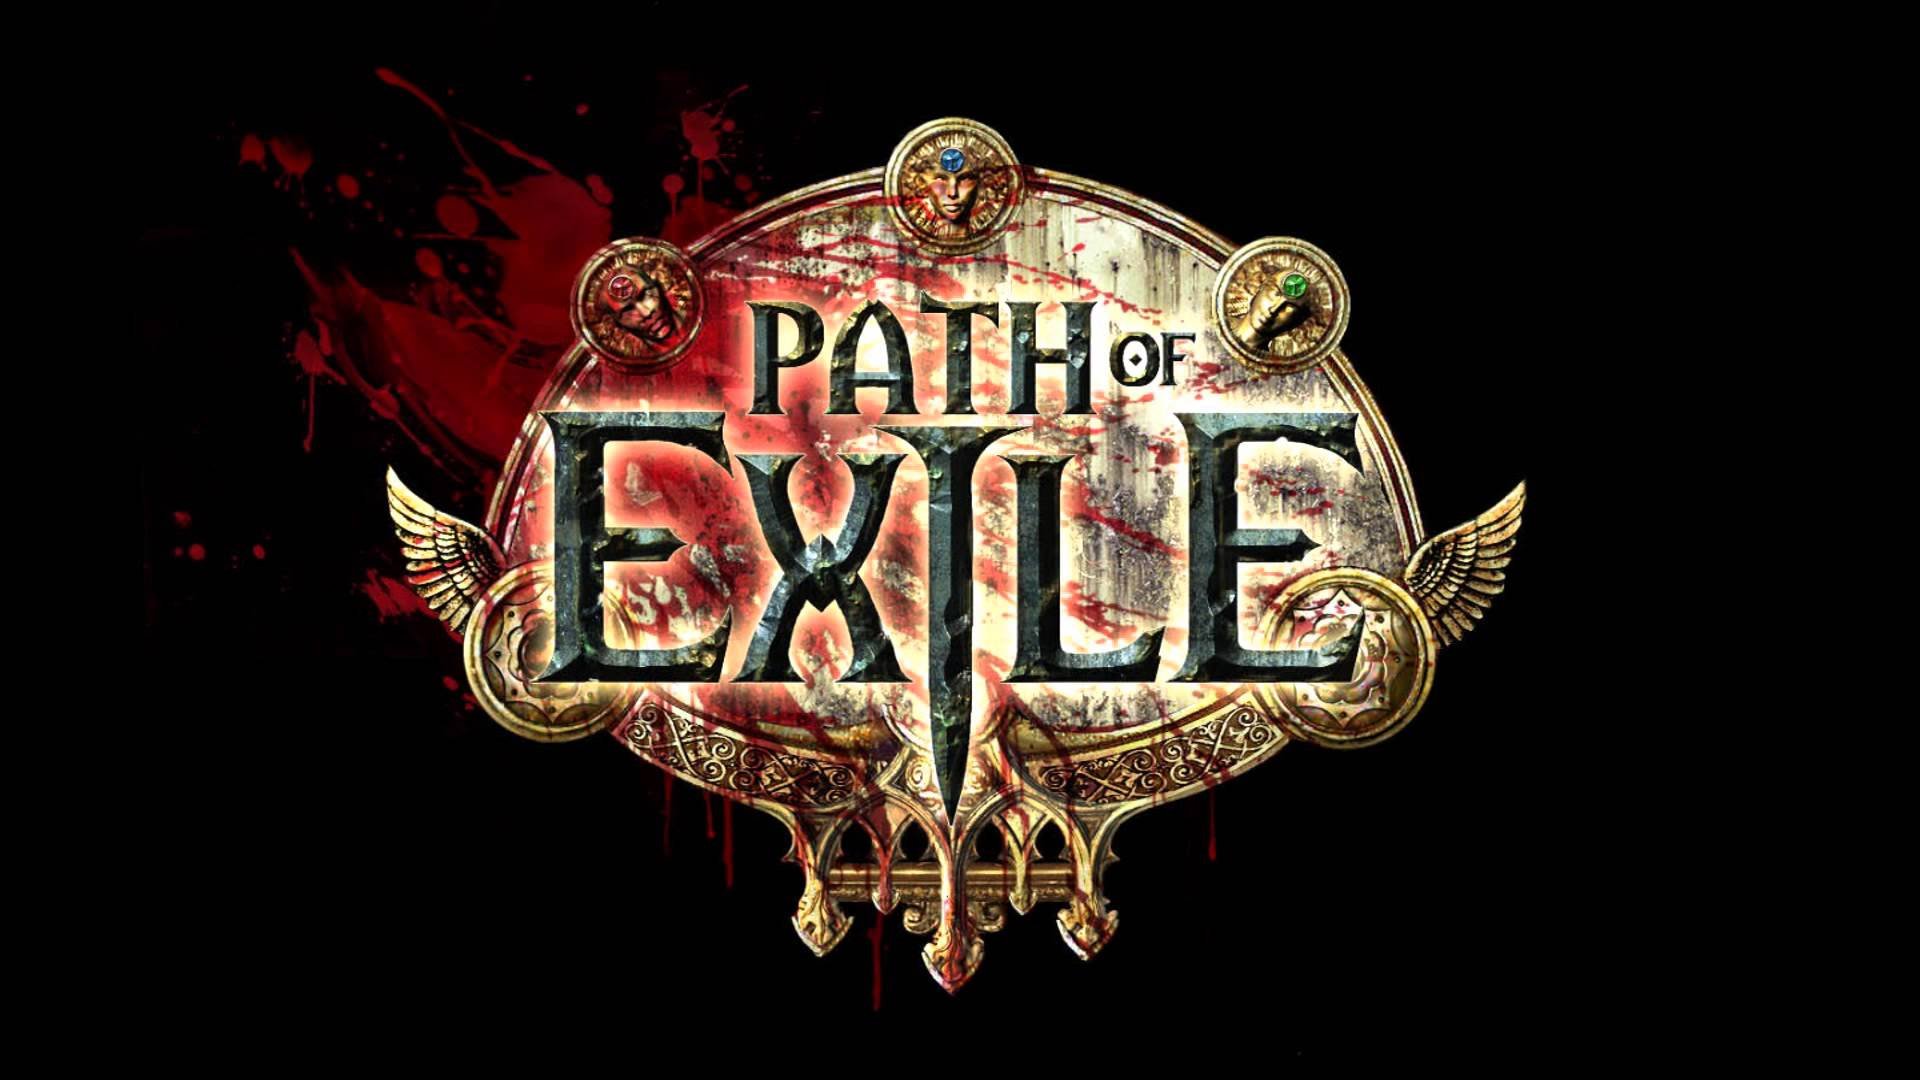 path of exile wallpaper 1920x1080,text,logo,font,graphic design,championship